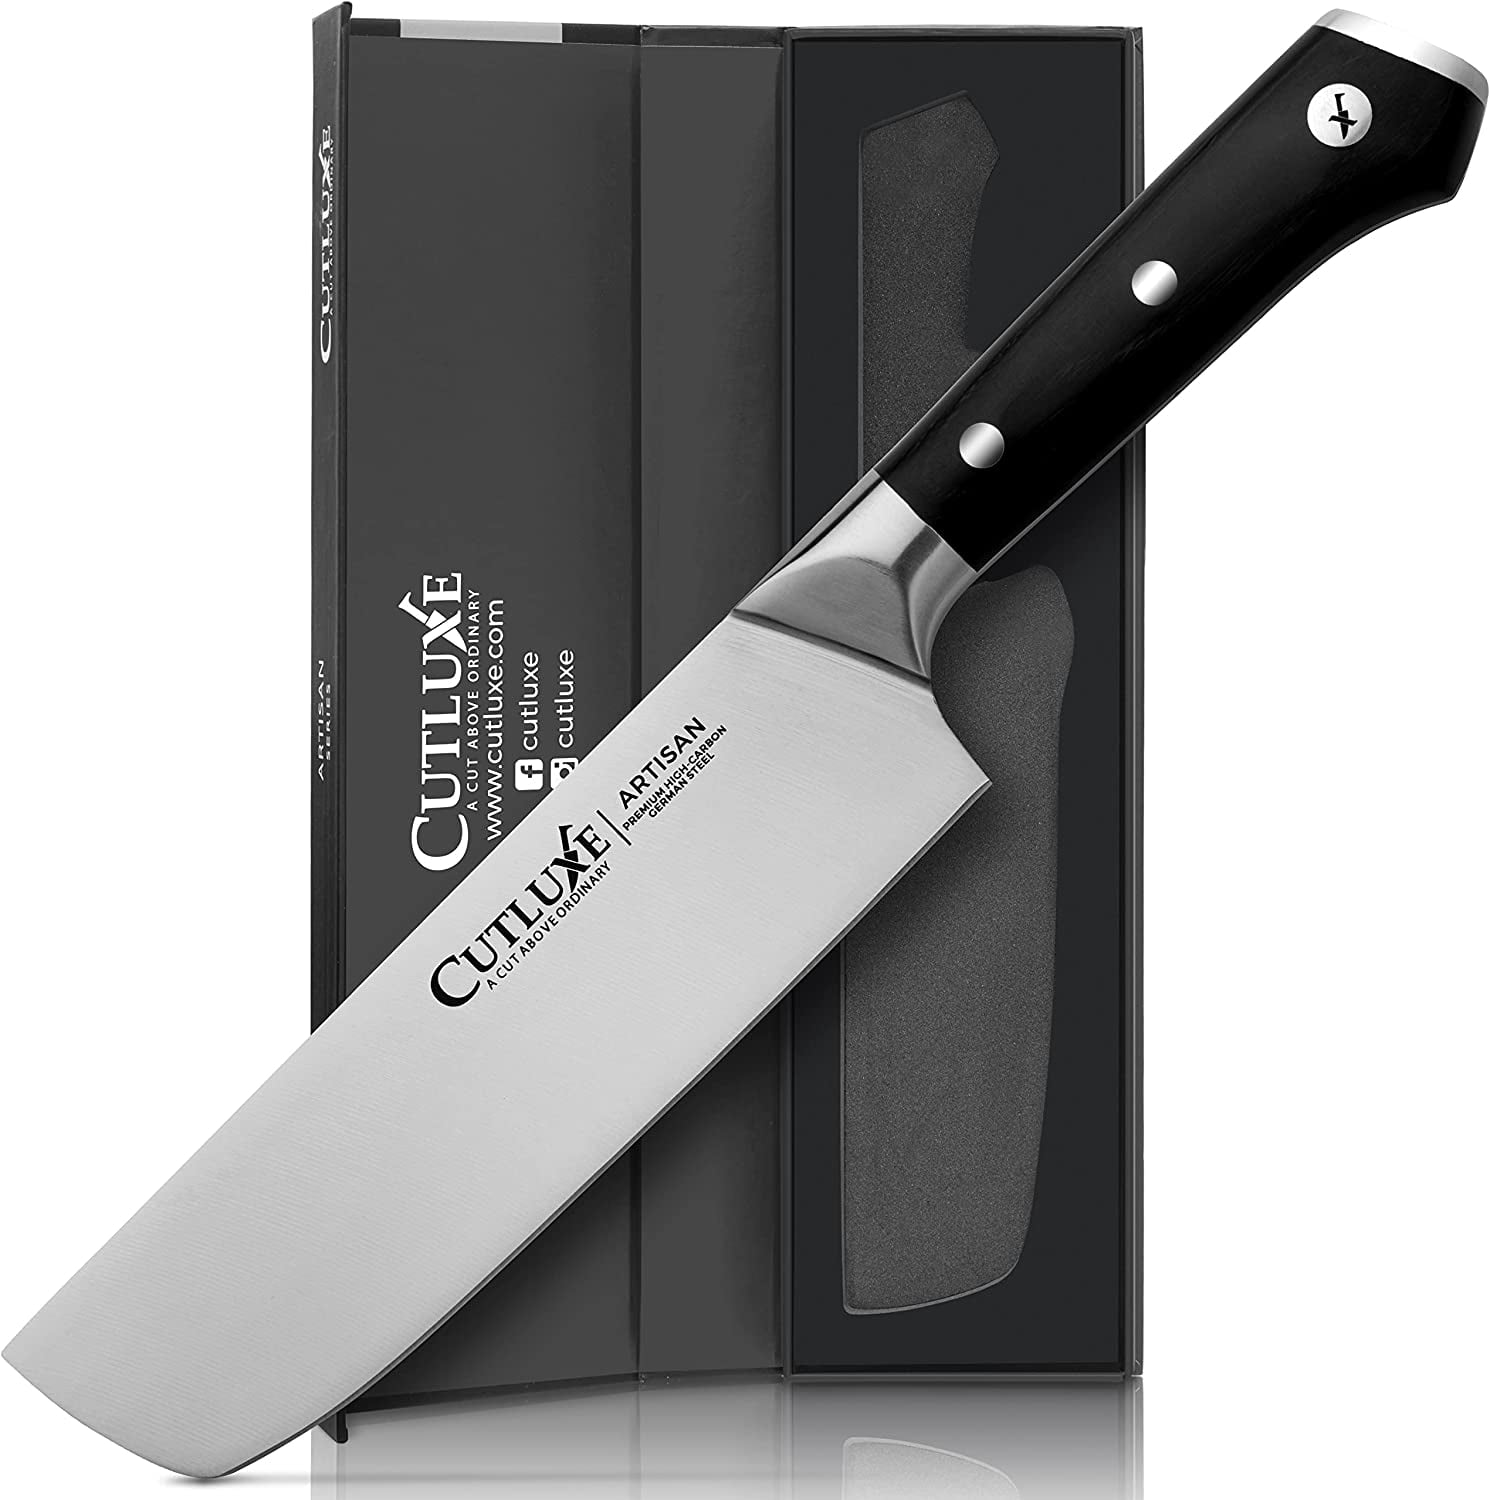 Cutluxe Slicing Carving Knife Review